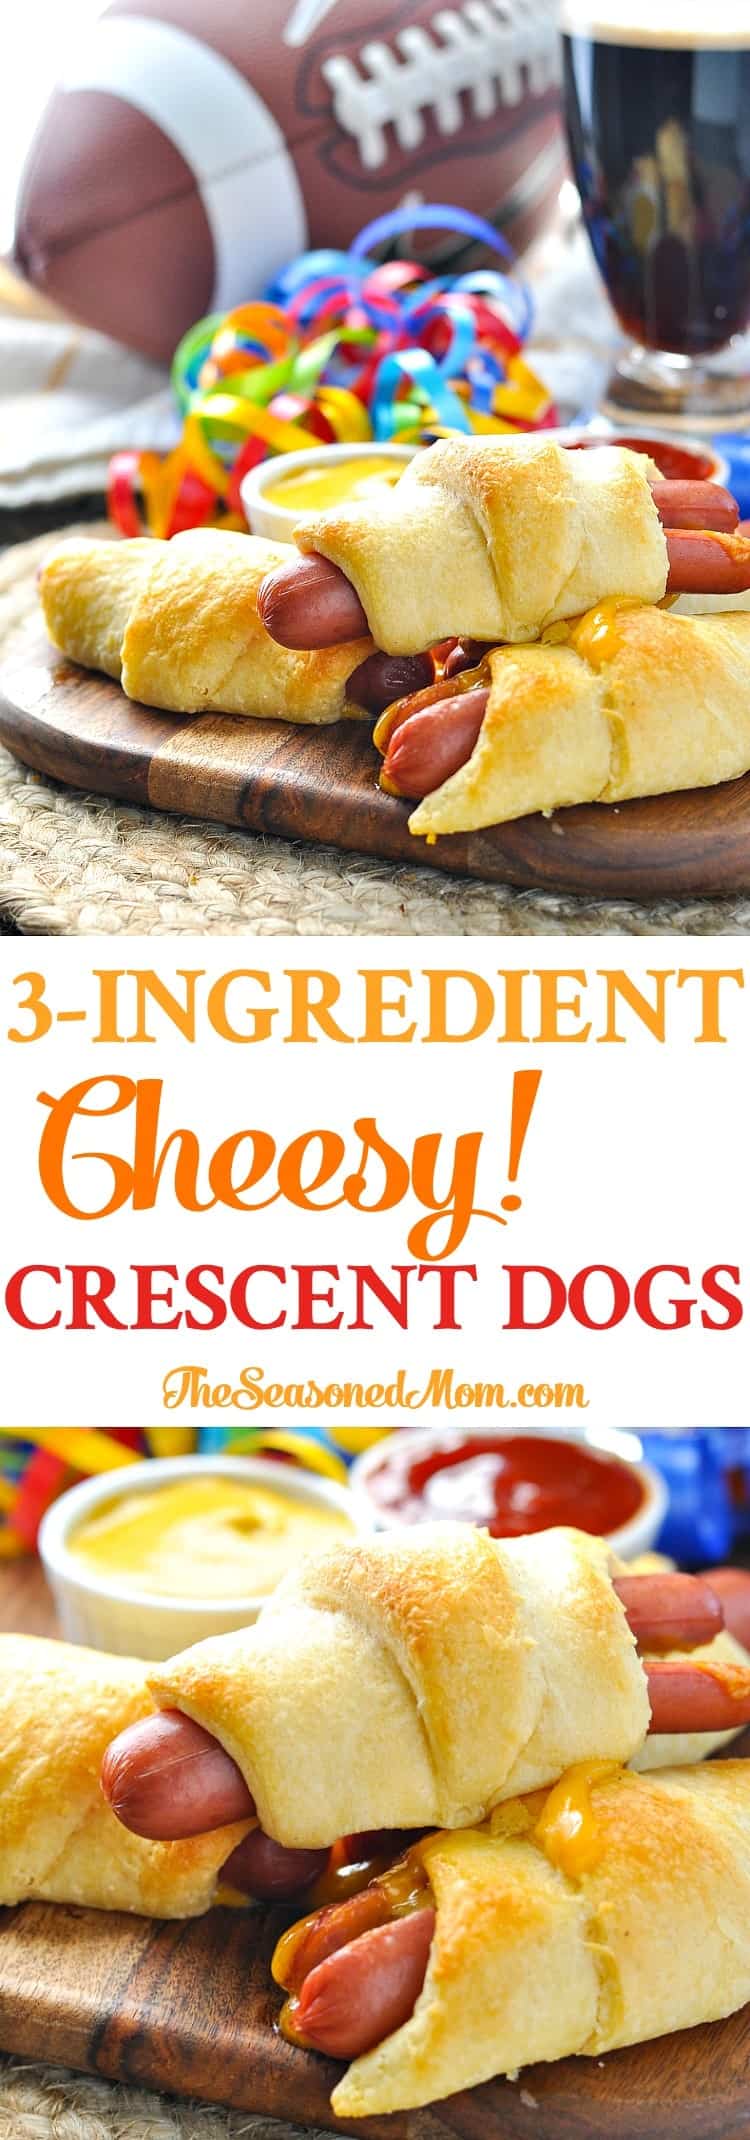 Long vertical image of hotdogs wrapped in crescent rolls.